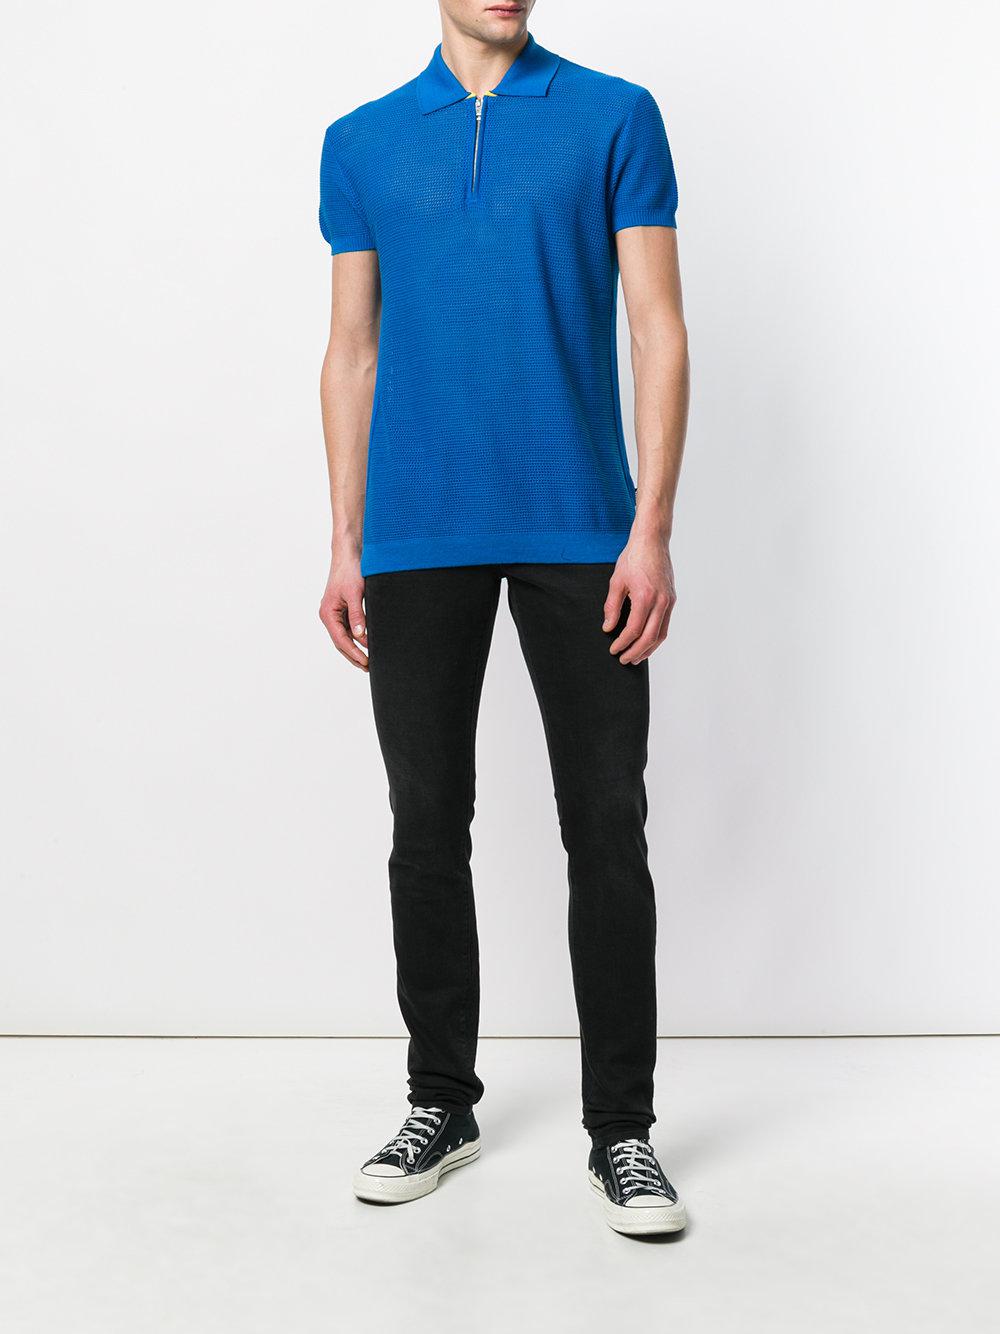 DIESEL Cotton Zip Front Polo Shirt in Blue for Men - Lyst